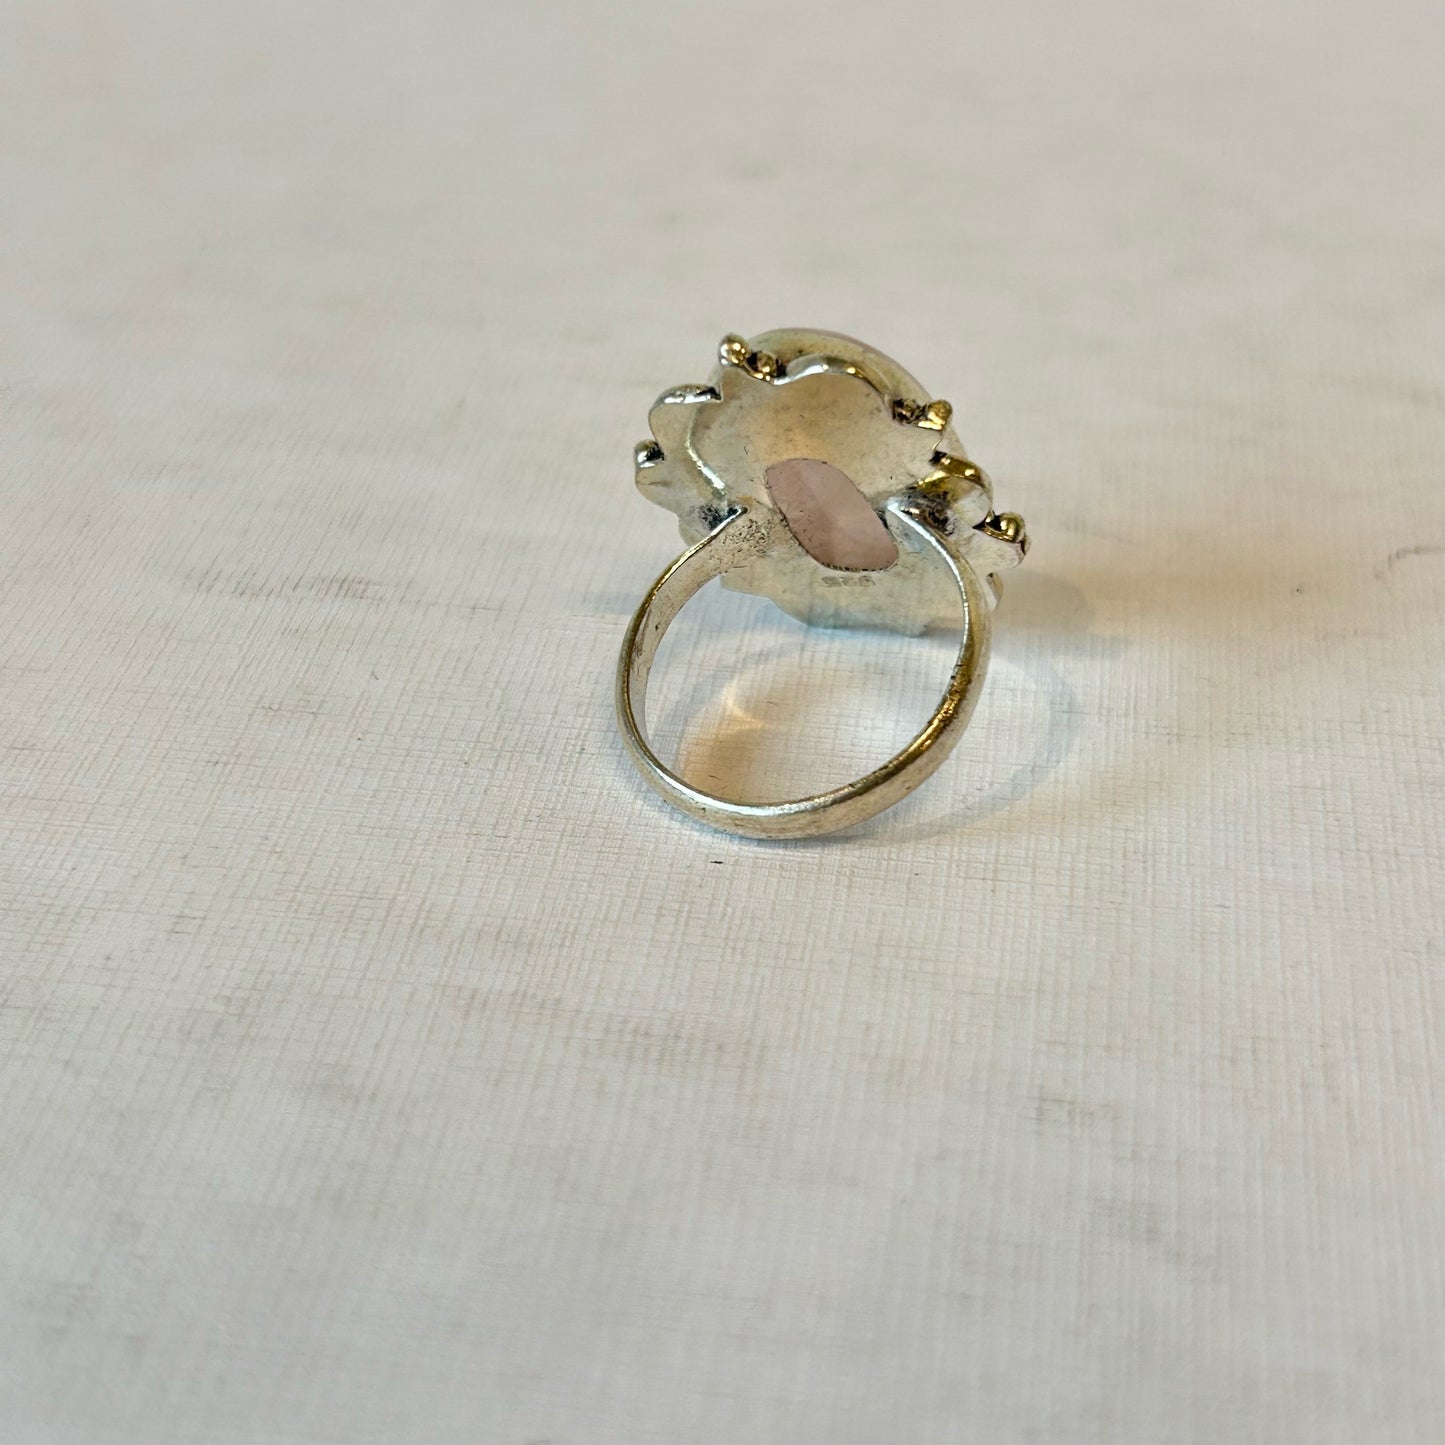 Silver Plated Rose Quarts Oval Ring